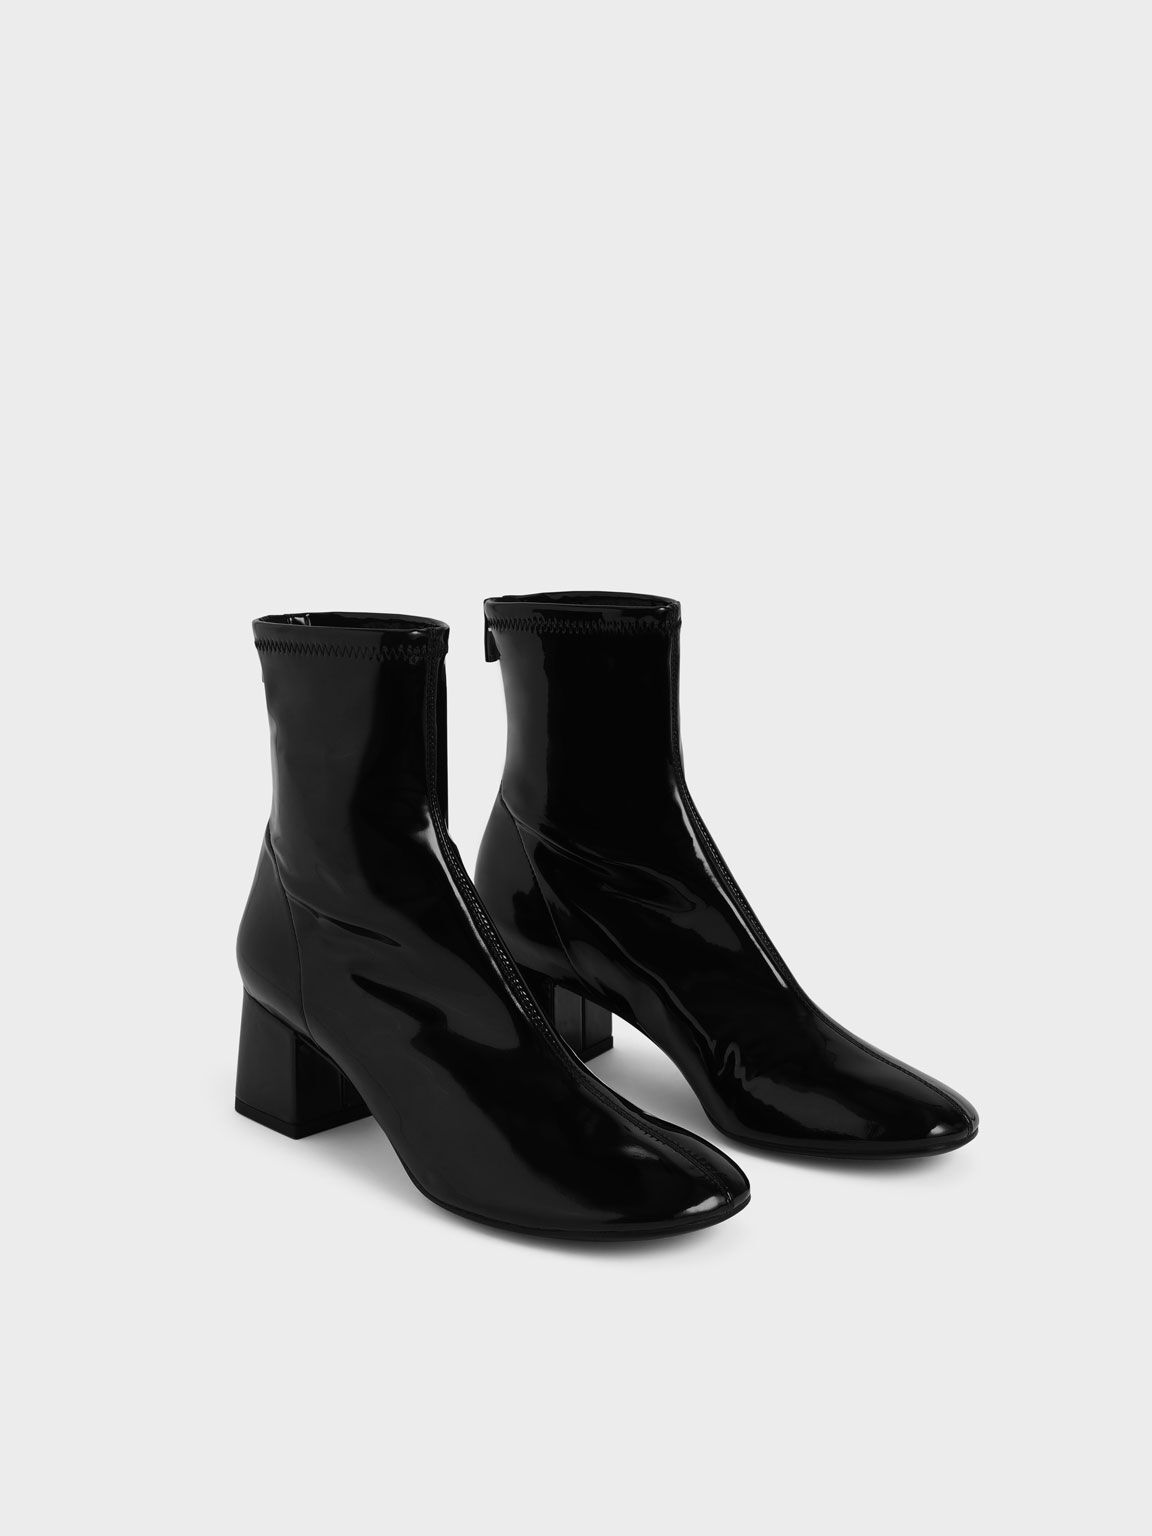 Black Patent Block Heel Ankle Boots - CHARLES & KEITH UK